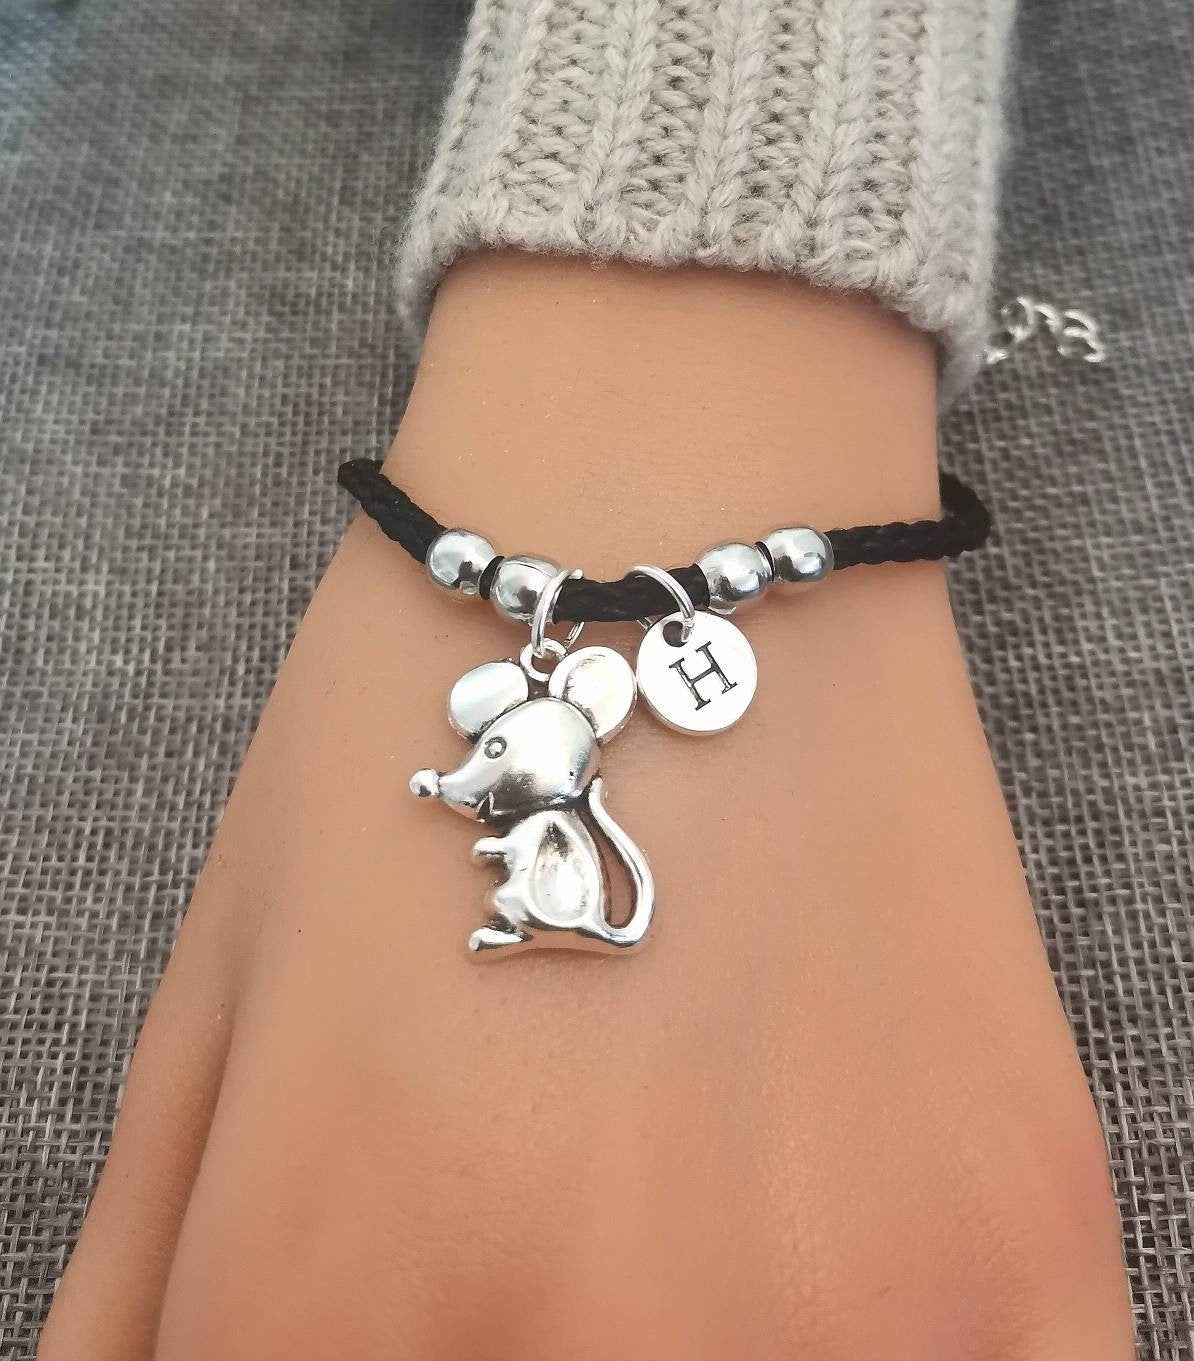 Mouse Gift, Birthday Gift for her, Mouse Bracelet, Silver Mouse Charm, Animal Bracelets, Mouse Jewelry, Mouse Bangle,Rat, Mice,Mouse,Initial